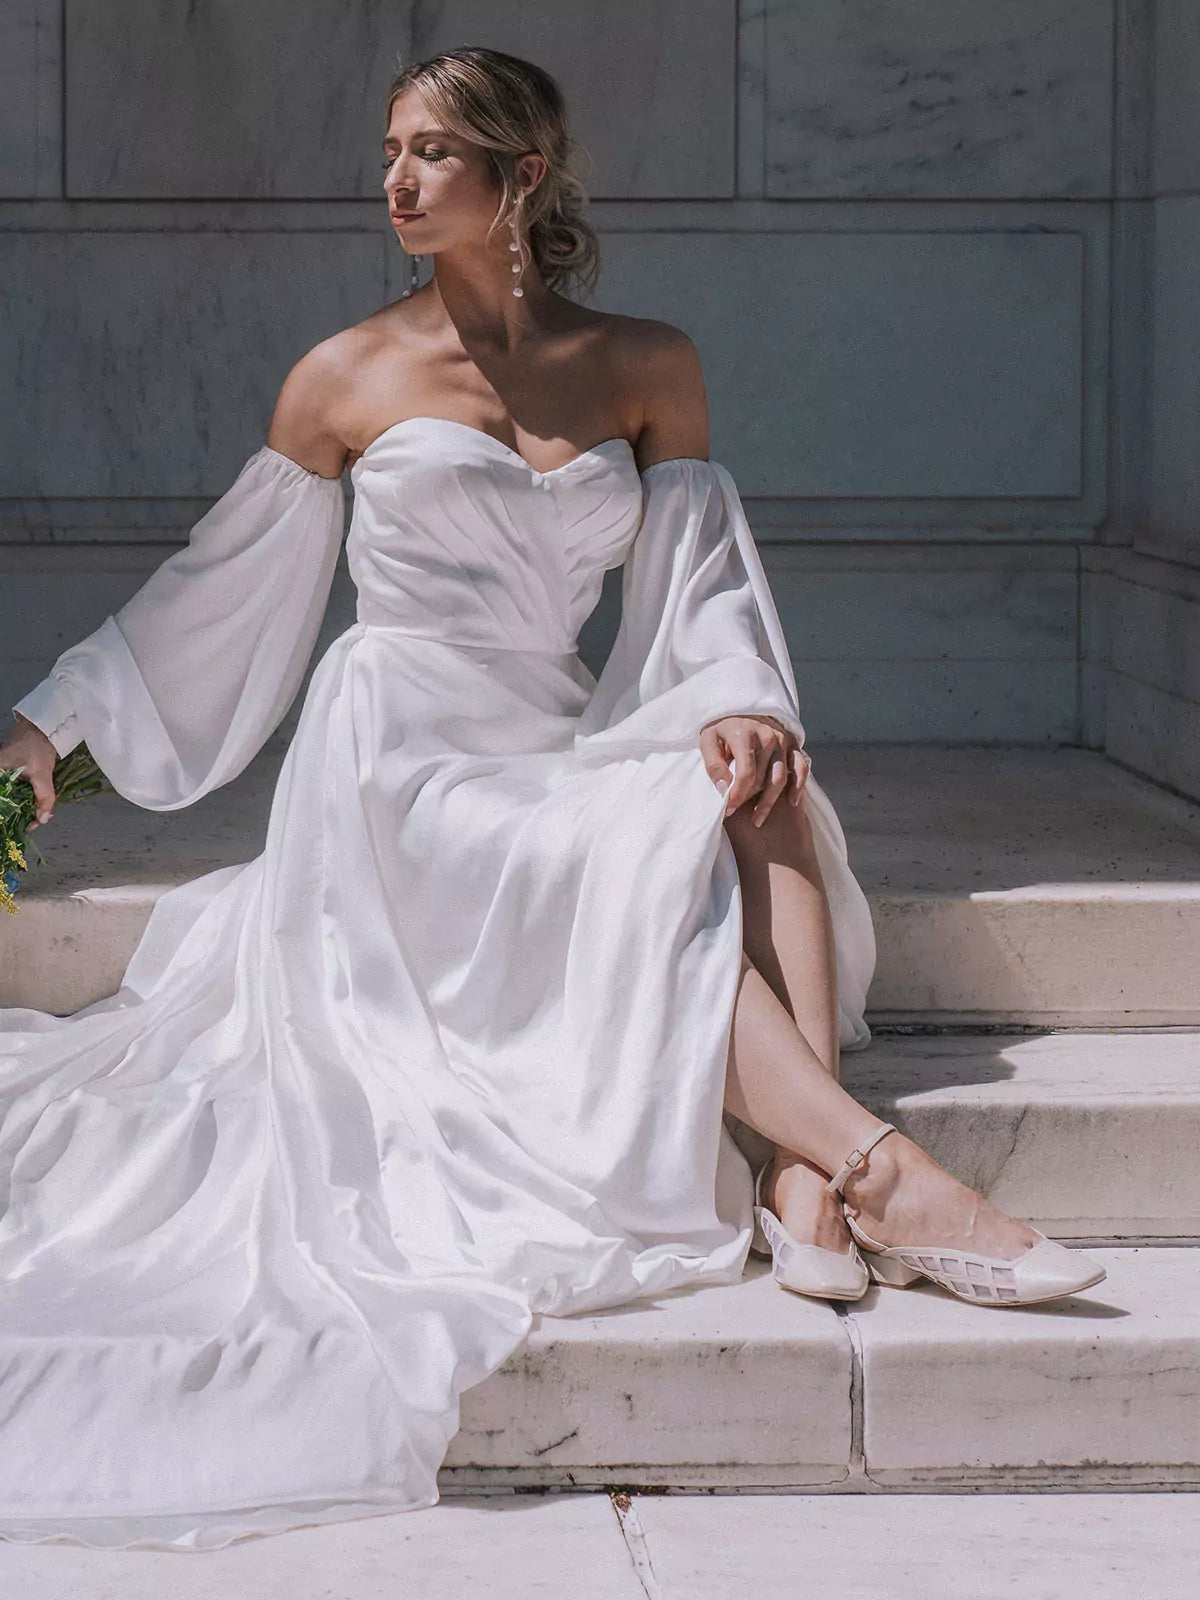 Shop The Best Bridal Shoes - E'mar Made in Italy